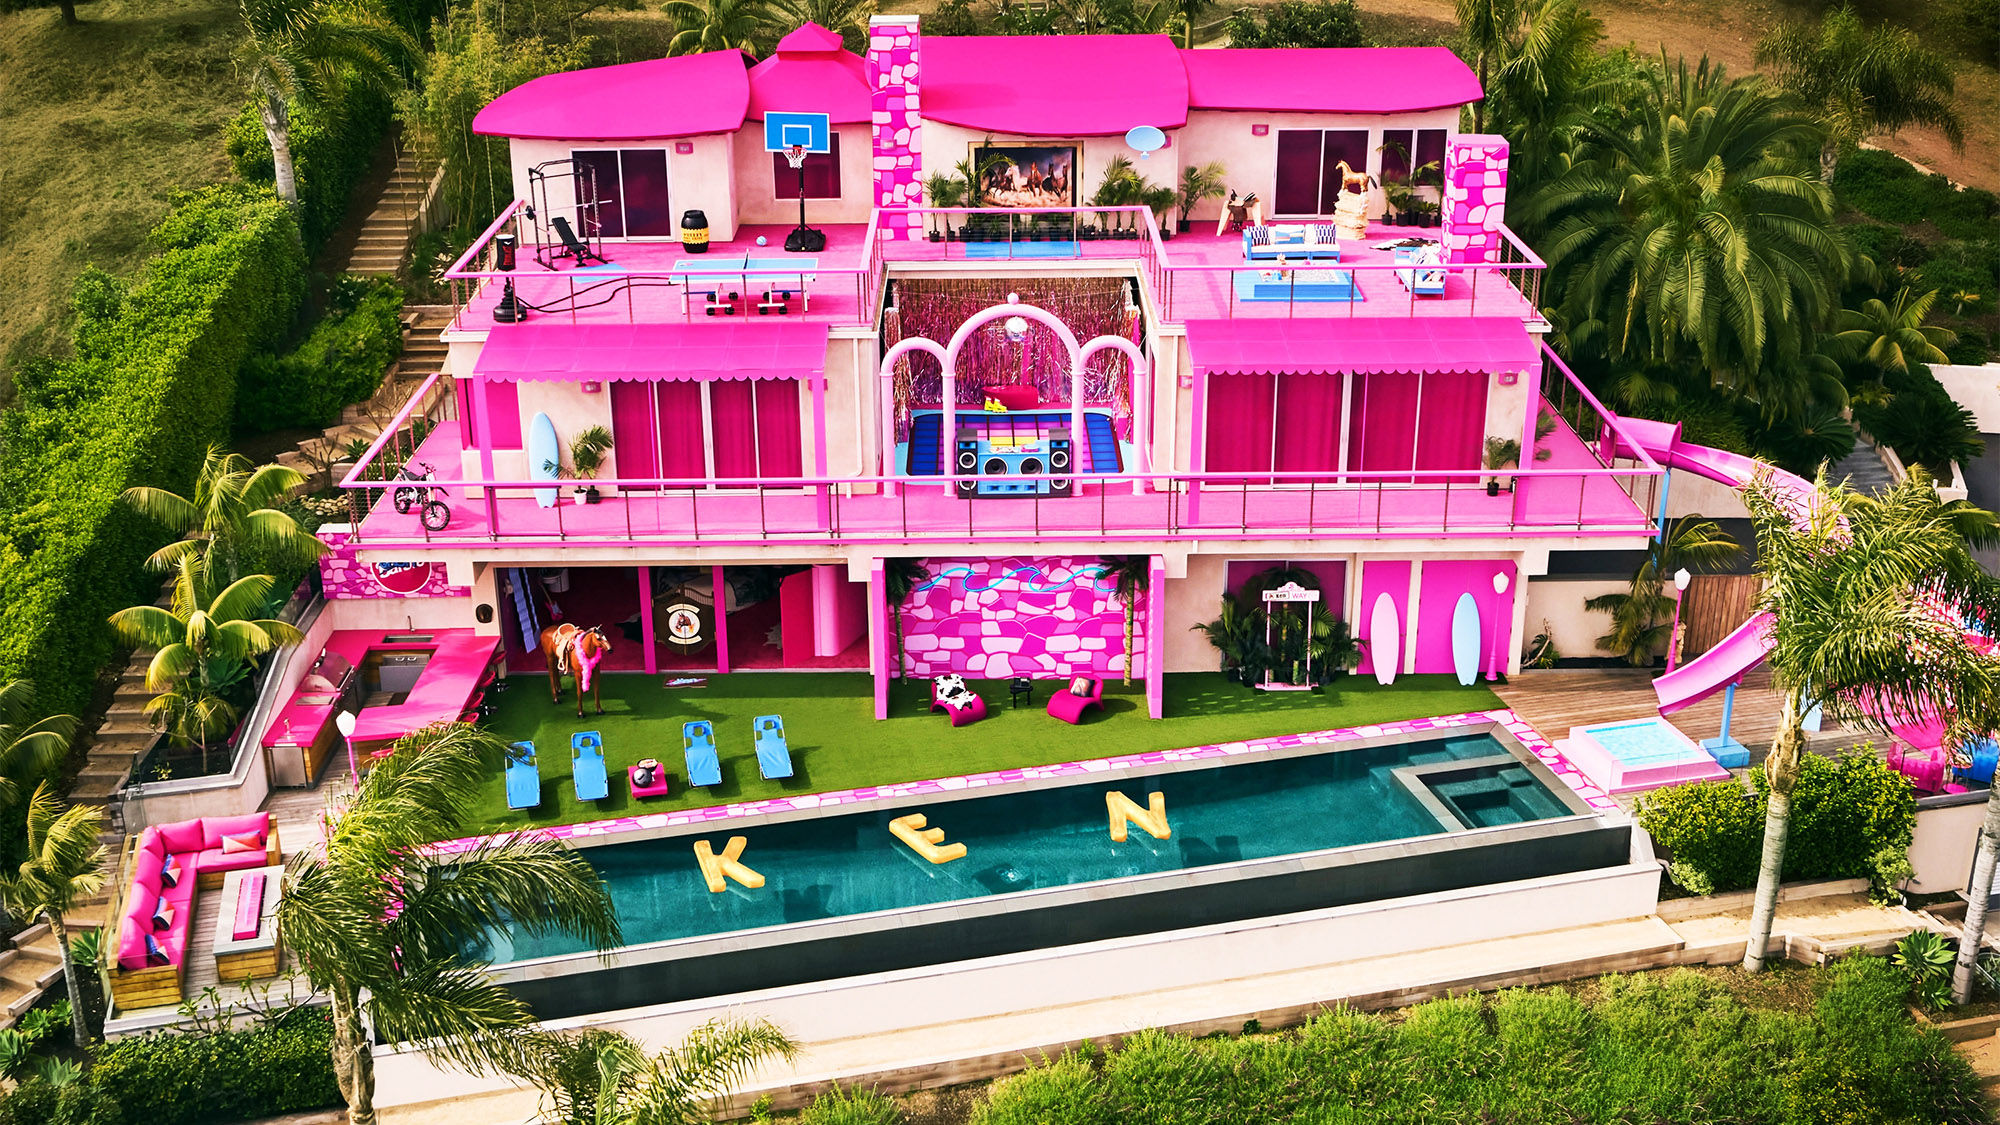 The Barbie's Malibu DreamHouse vacation rental, which first debuted in California in 2019, has relaunched on Airbnb to commemorate the Barbie movie's release. Airbnb is offering two free, individual one-night stays for up to two guests in Ken's bedroom.